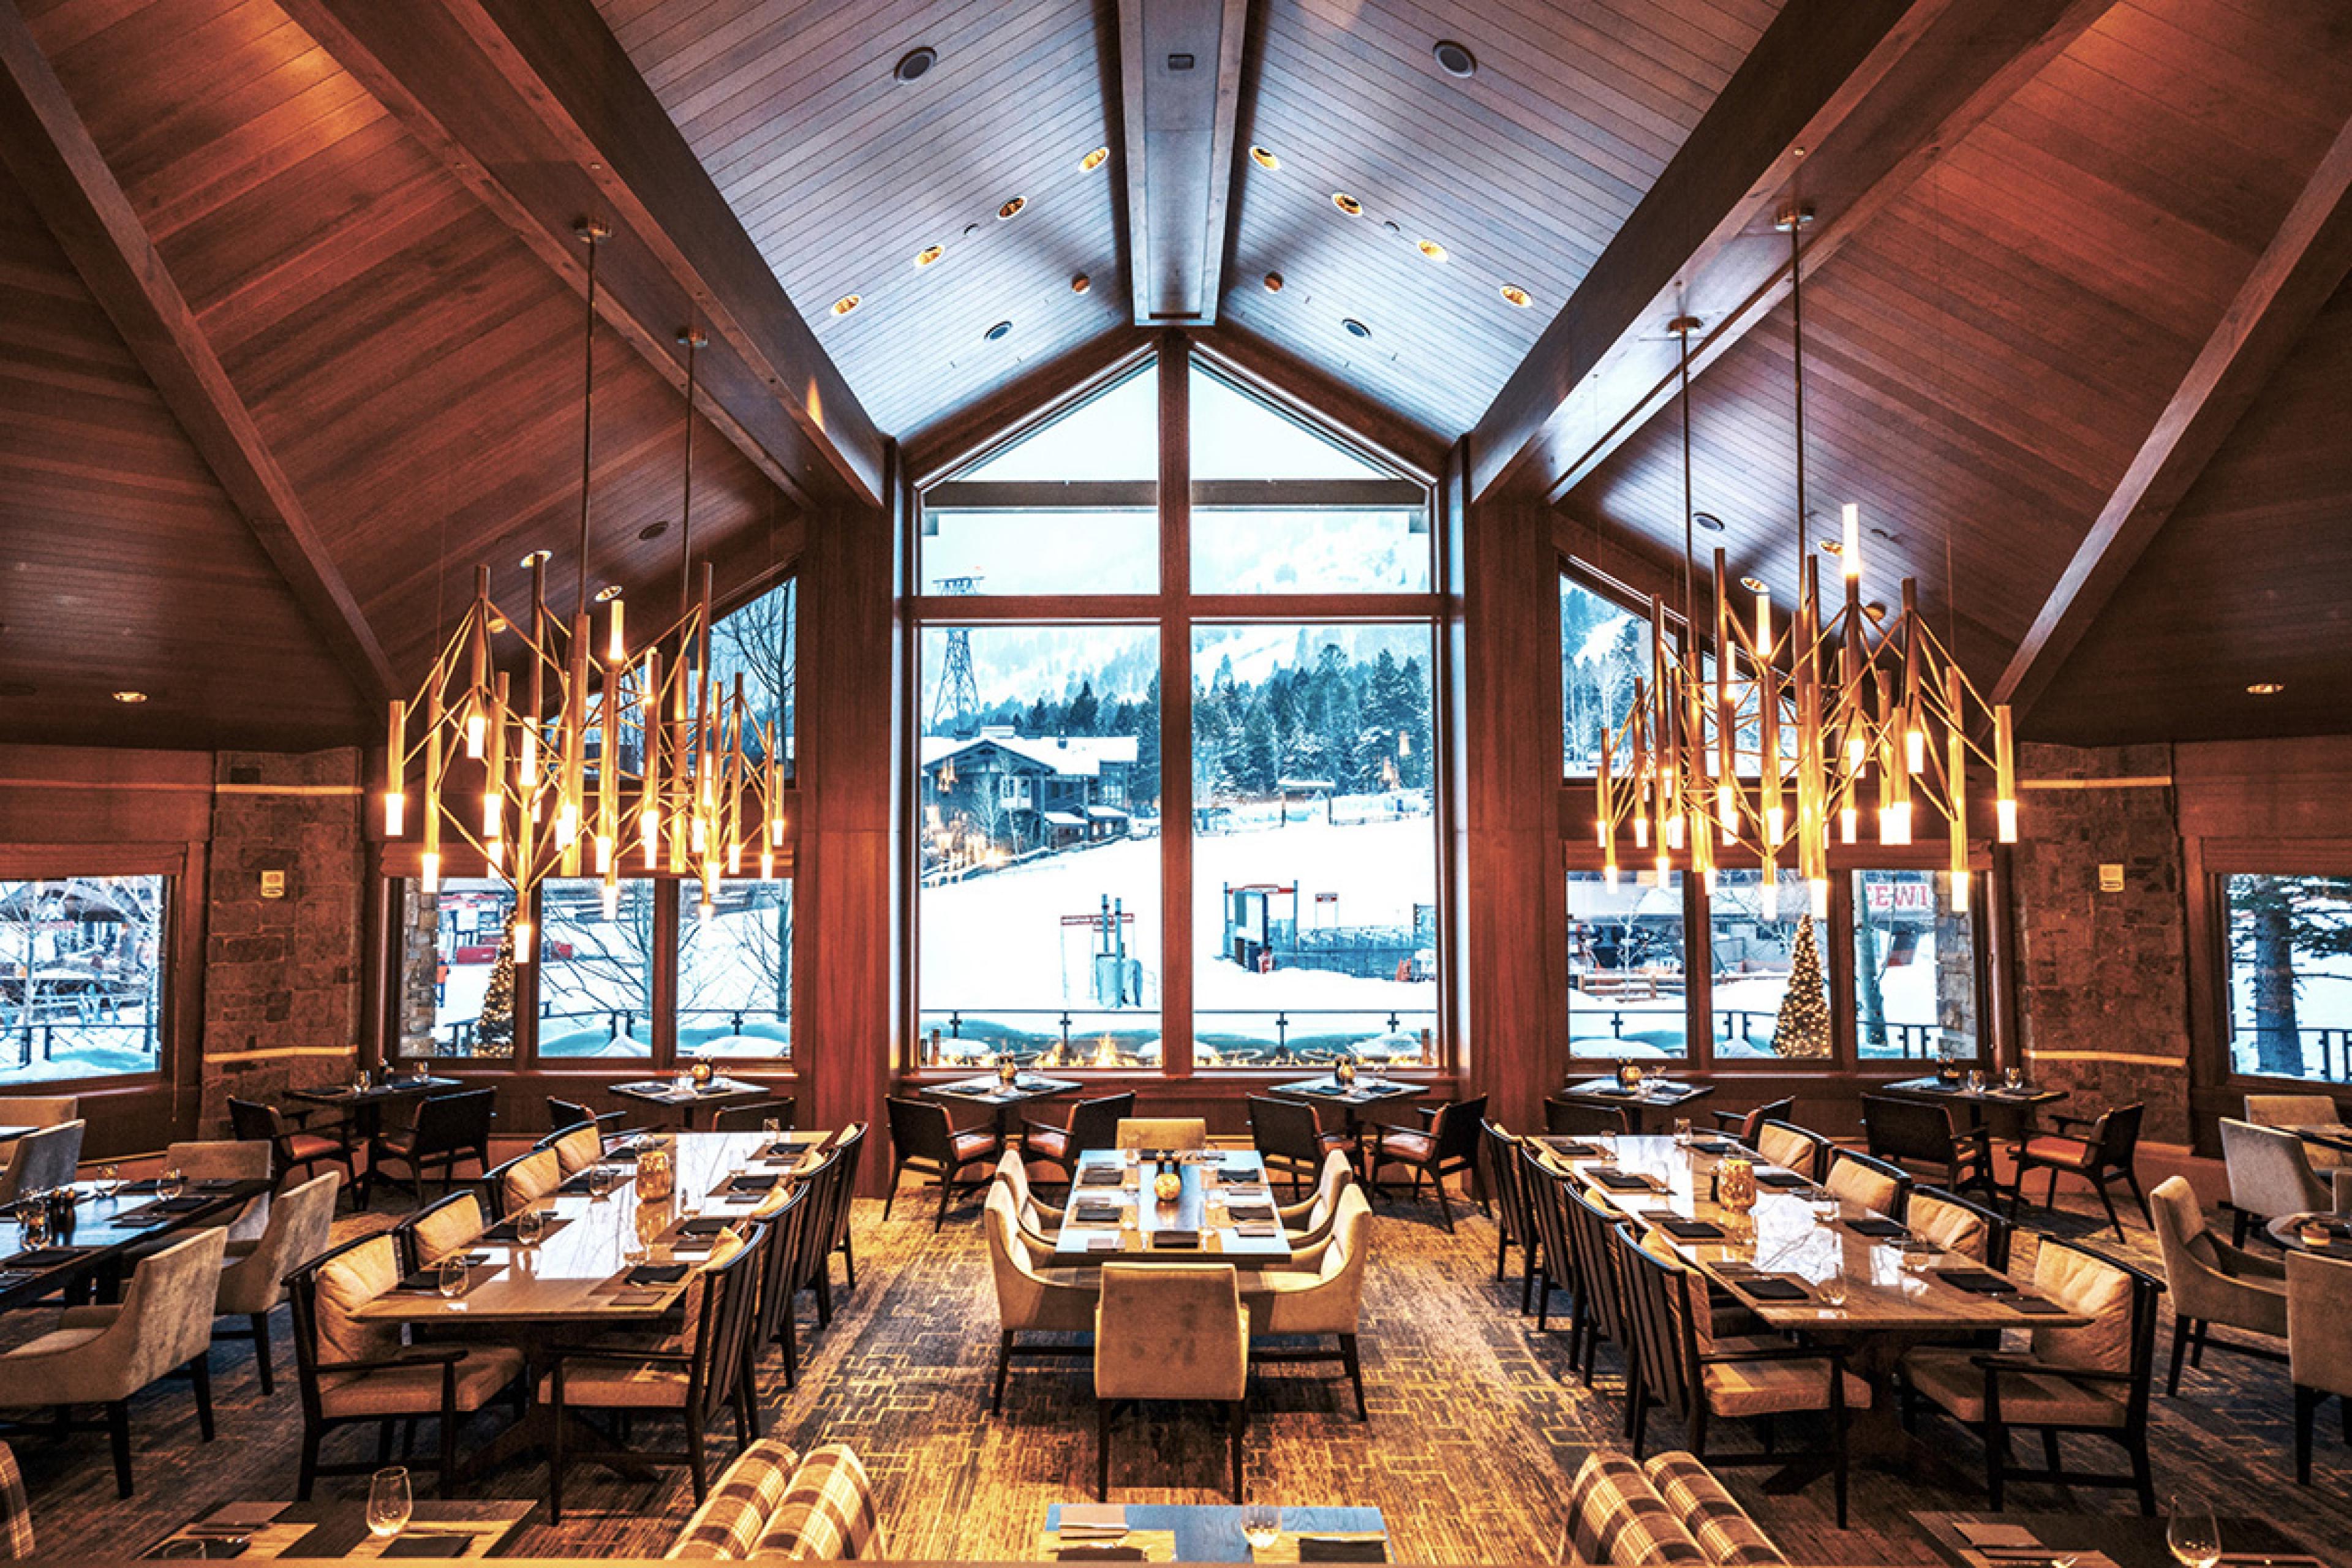 rustic, lodge style restaurant with large chandeliers